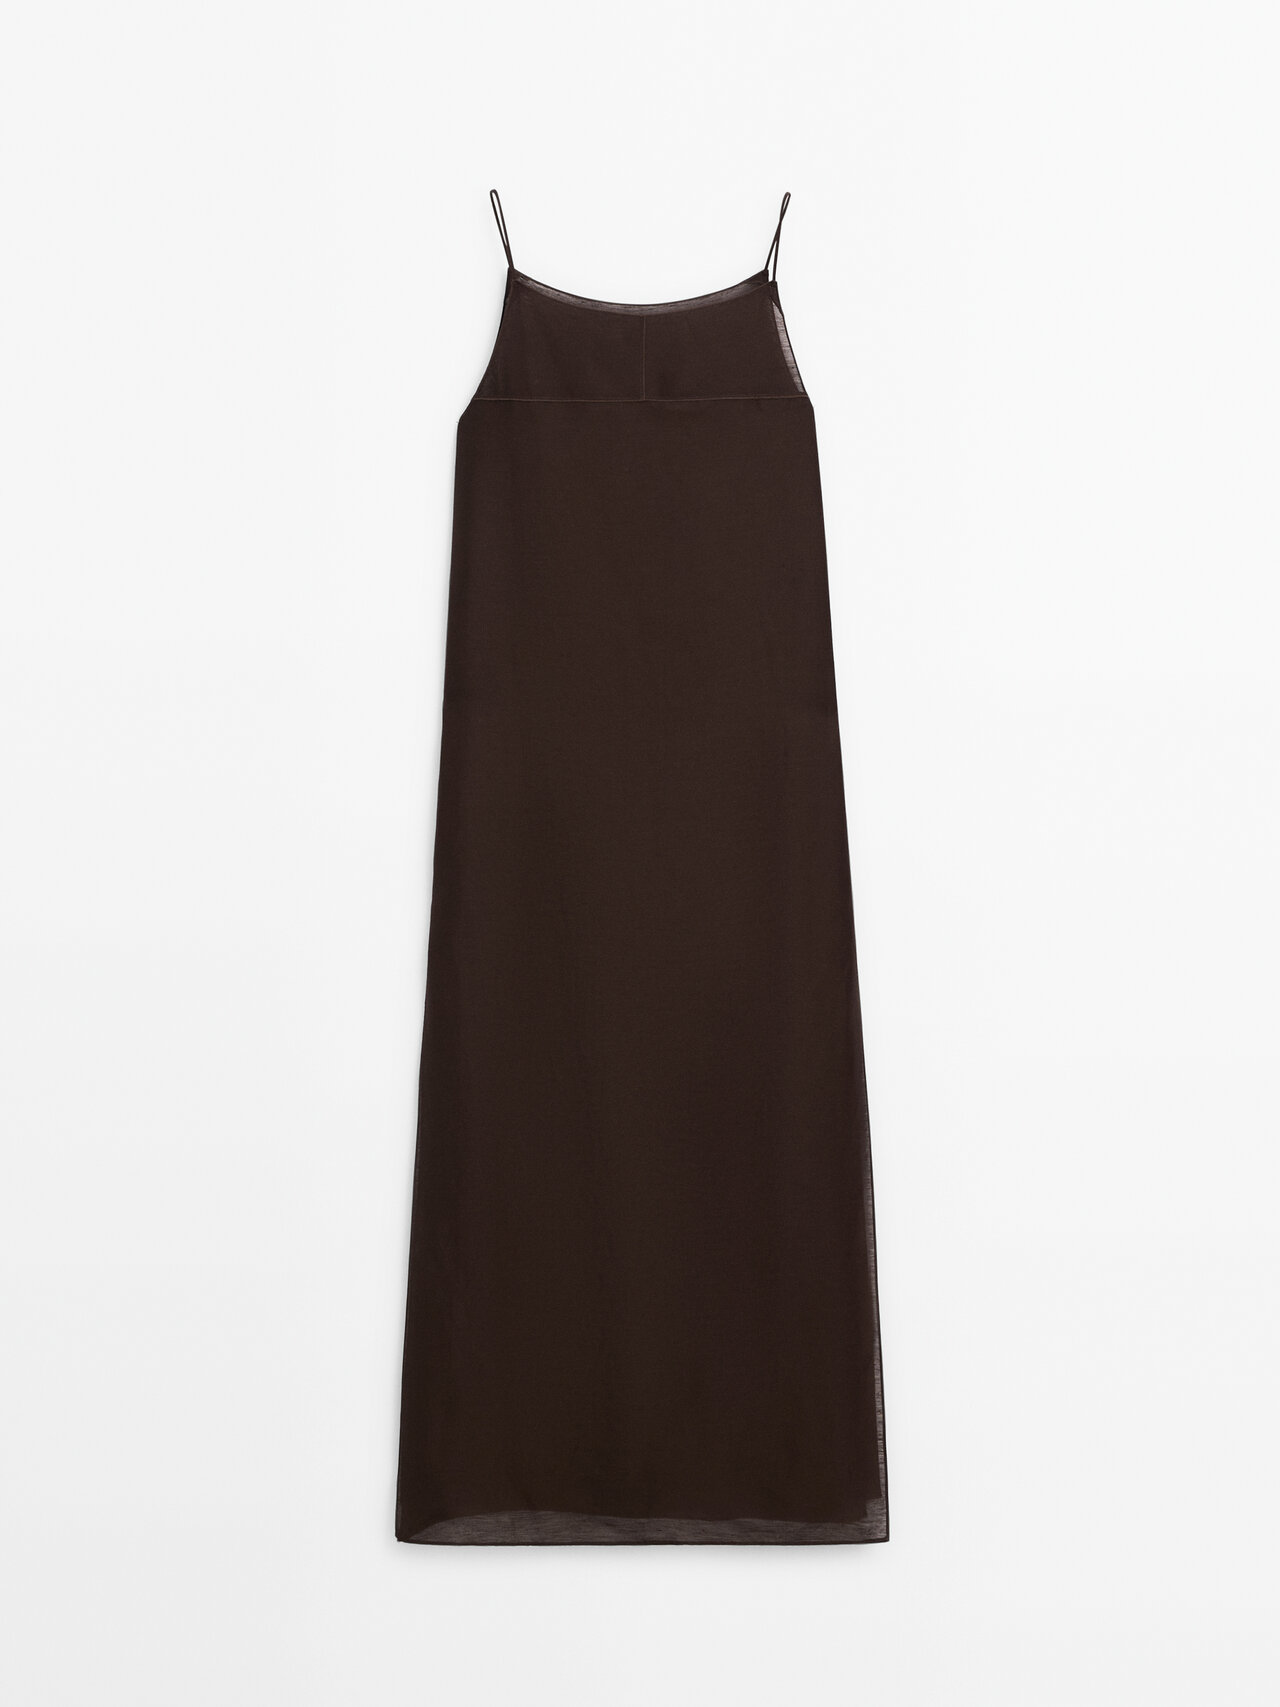 Massimo Dutti Strappy Dress With Semi-sheer Details In Chocolate